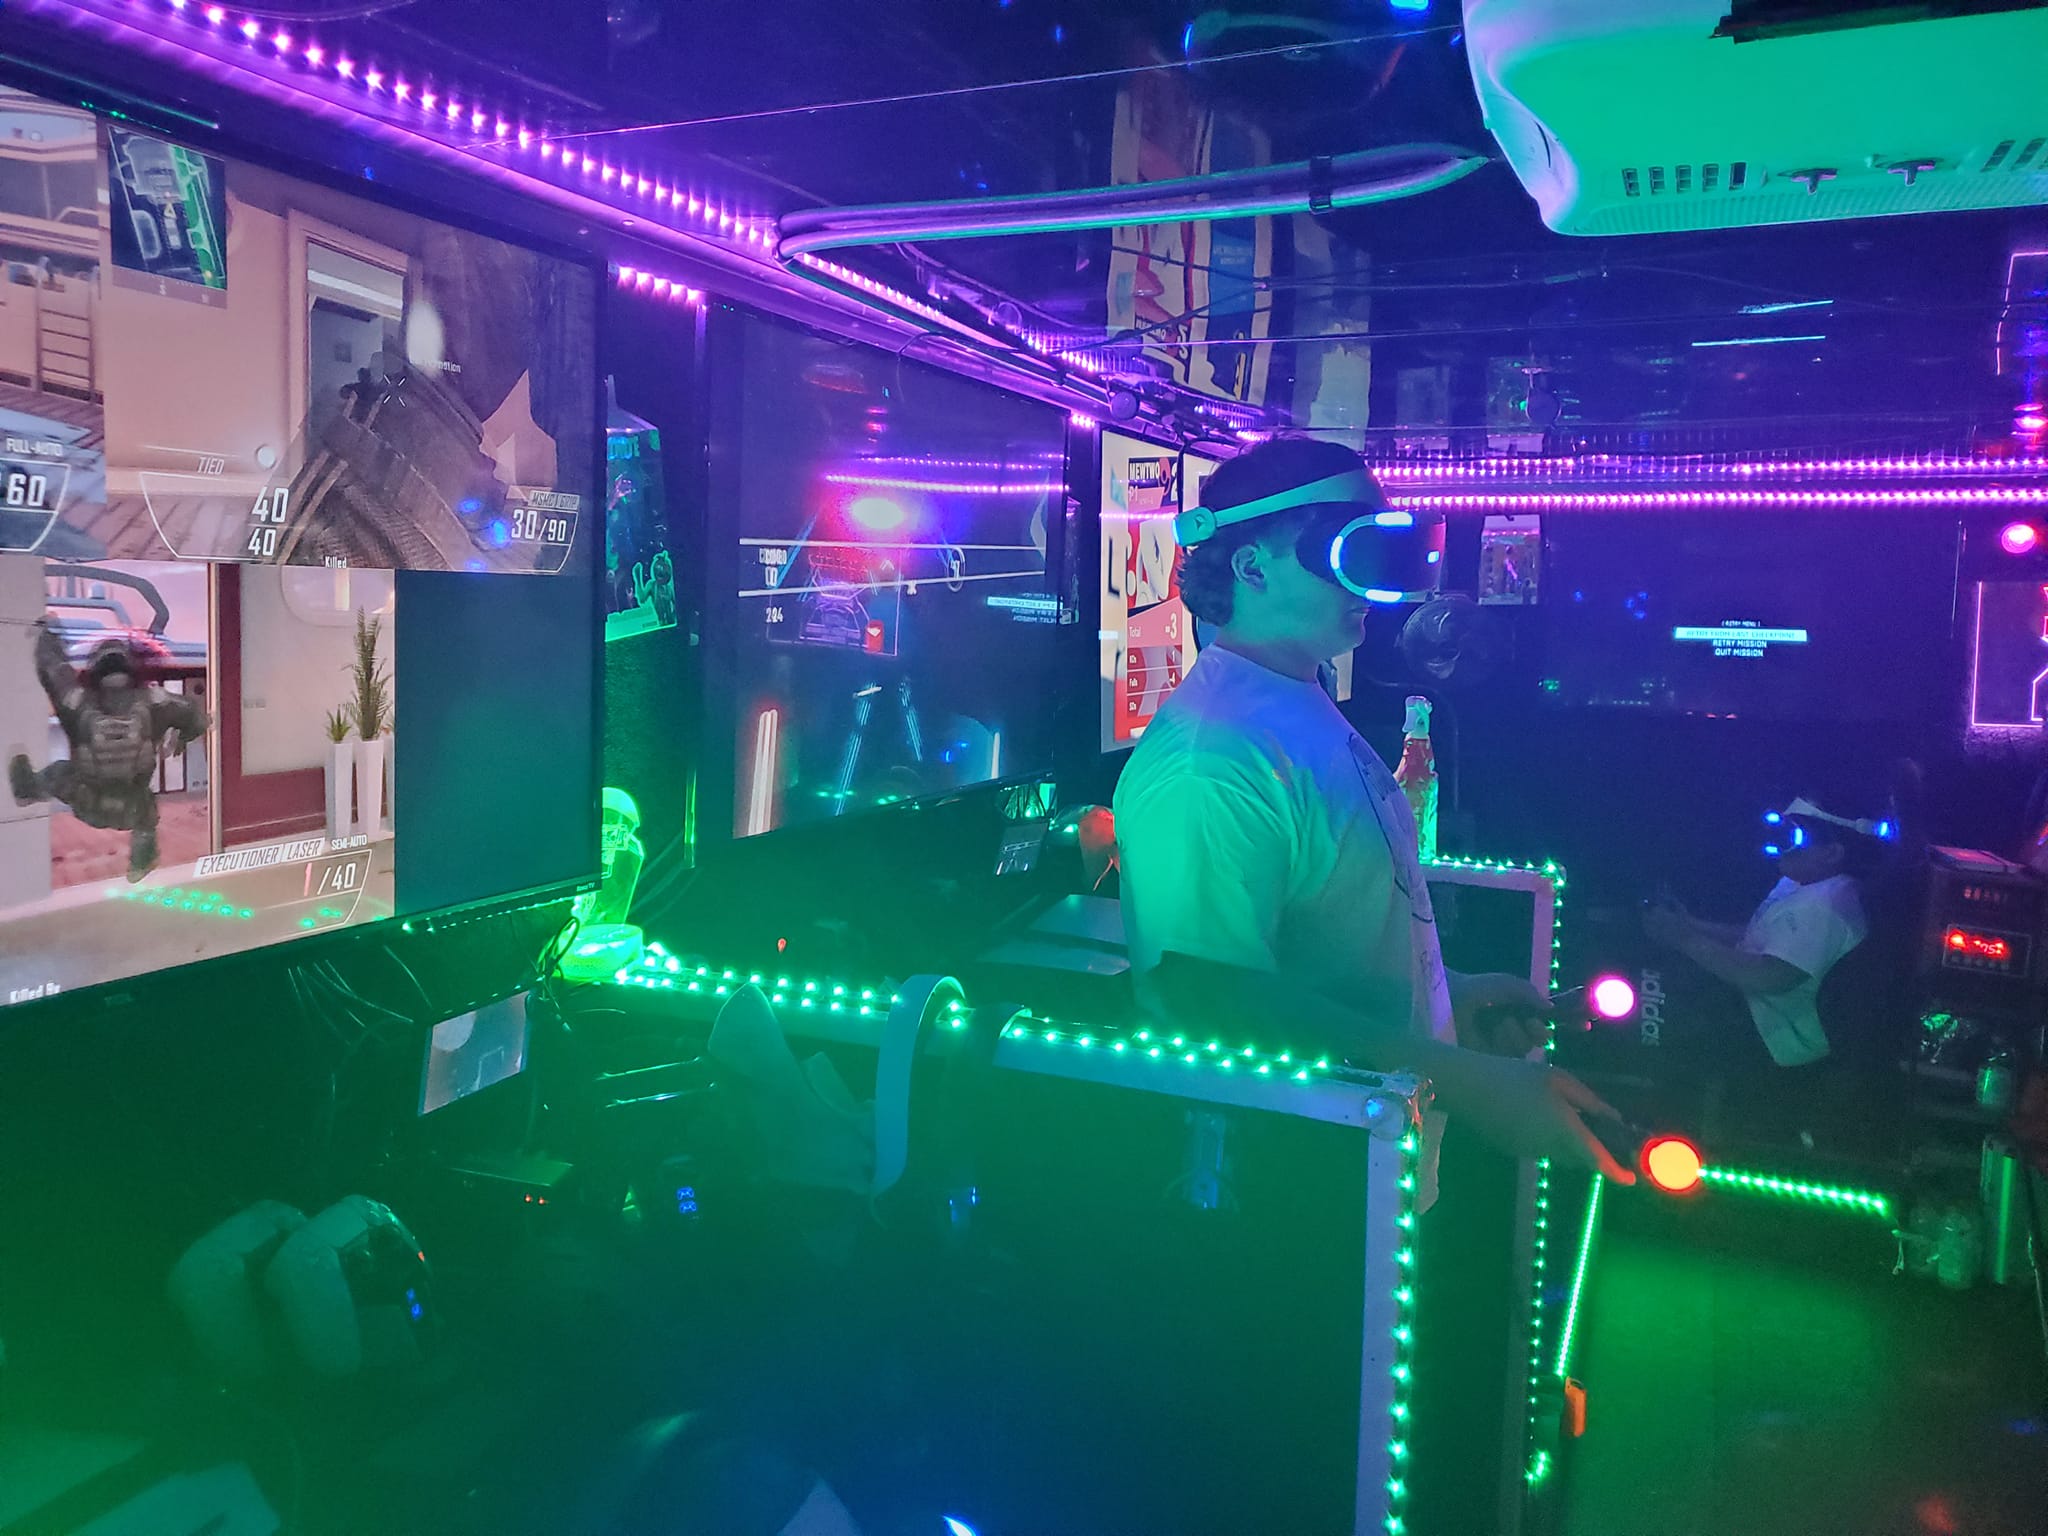 VR Game Truck is awesome for Post-Prom!